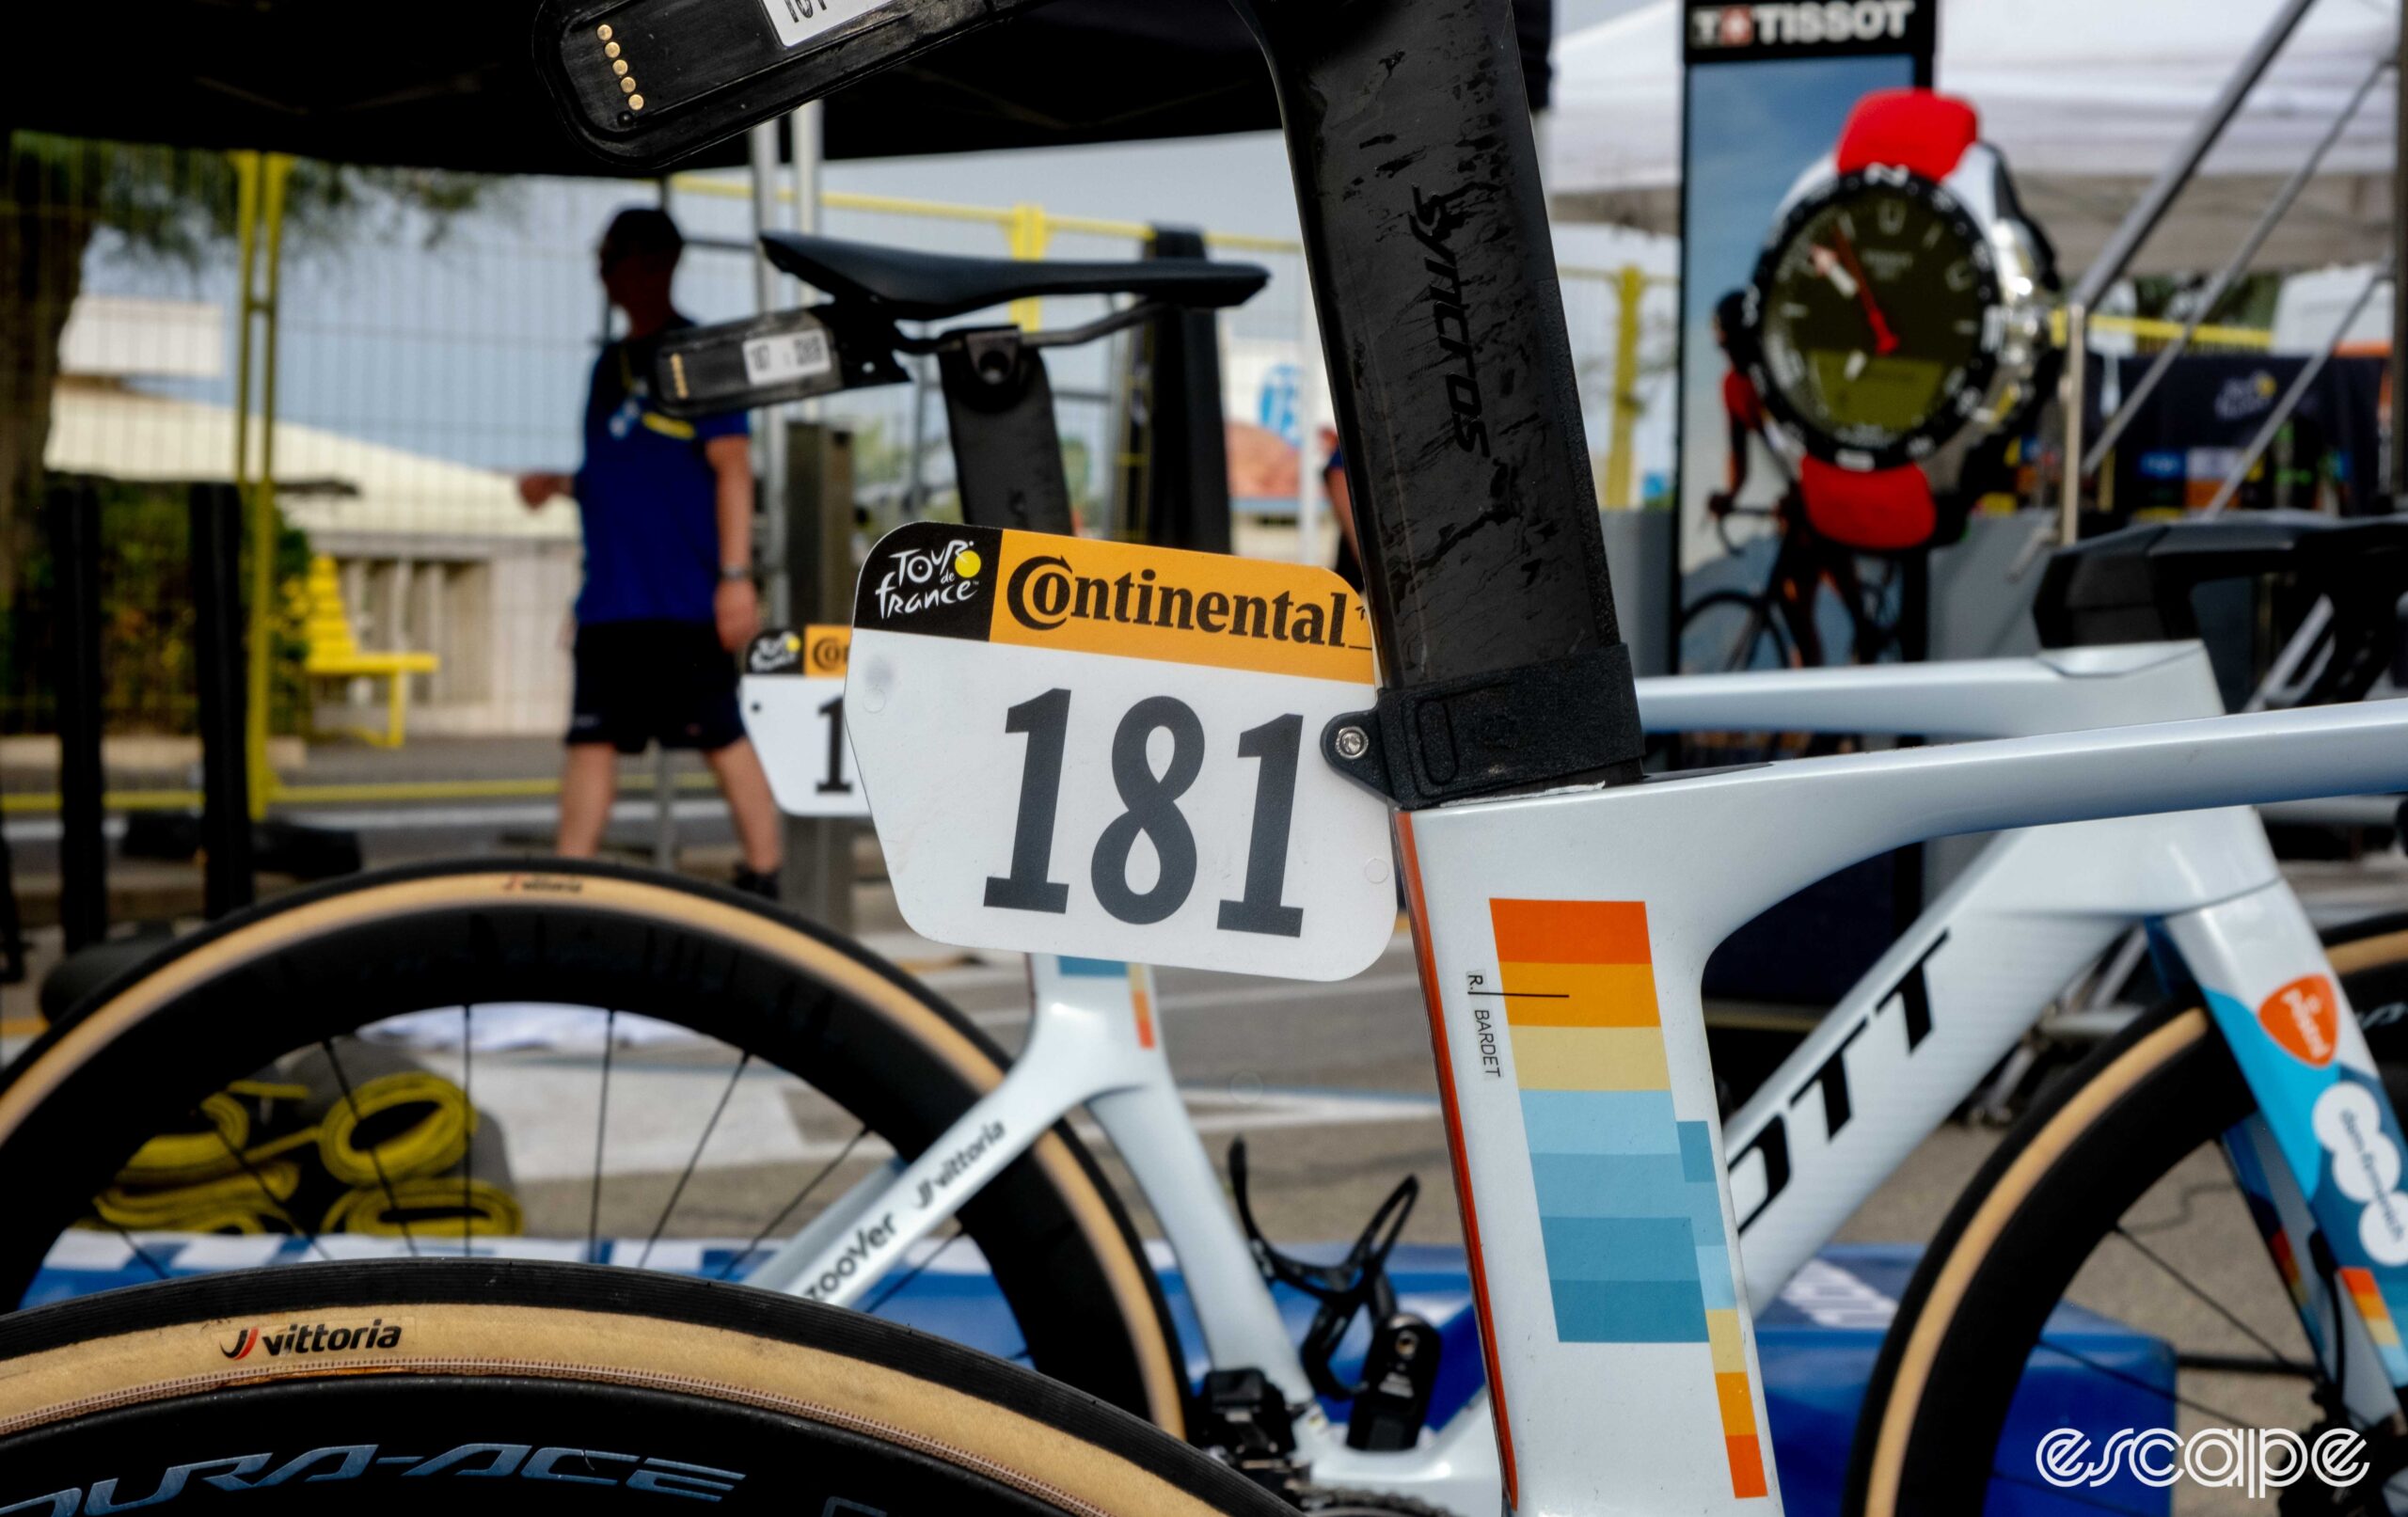 The photo shows Bardet's seat tube with his frame number 181, we can just see the number 1 on van den Broek's bike number in the background. 